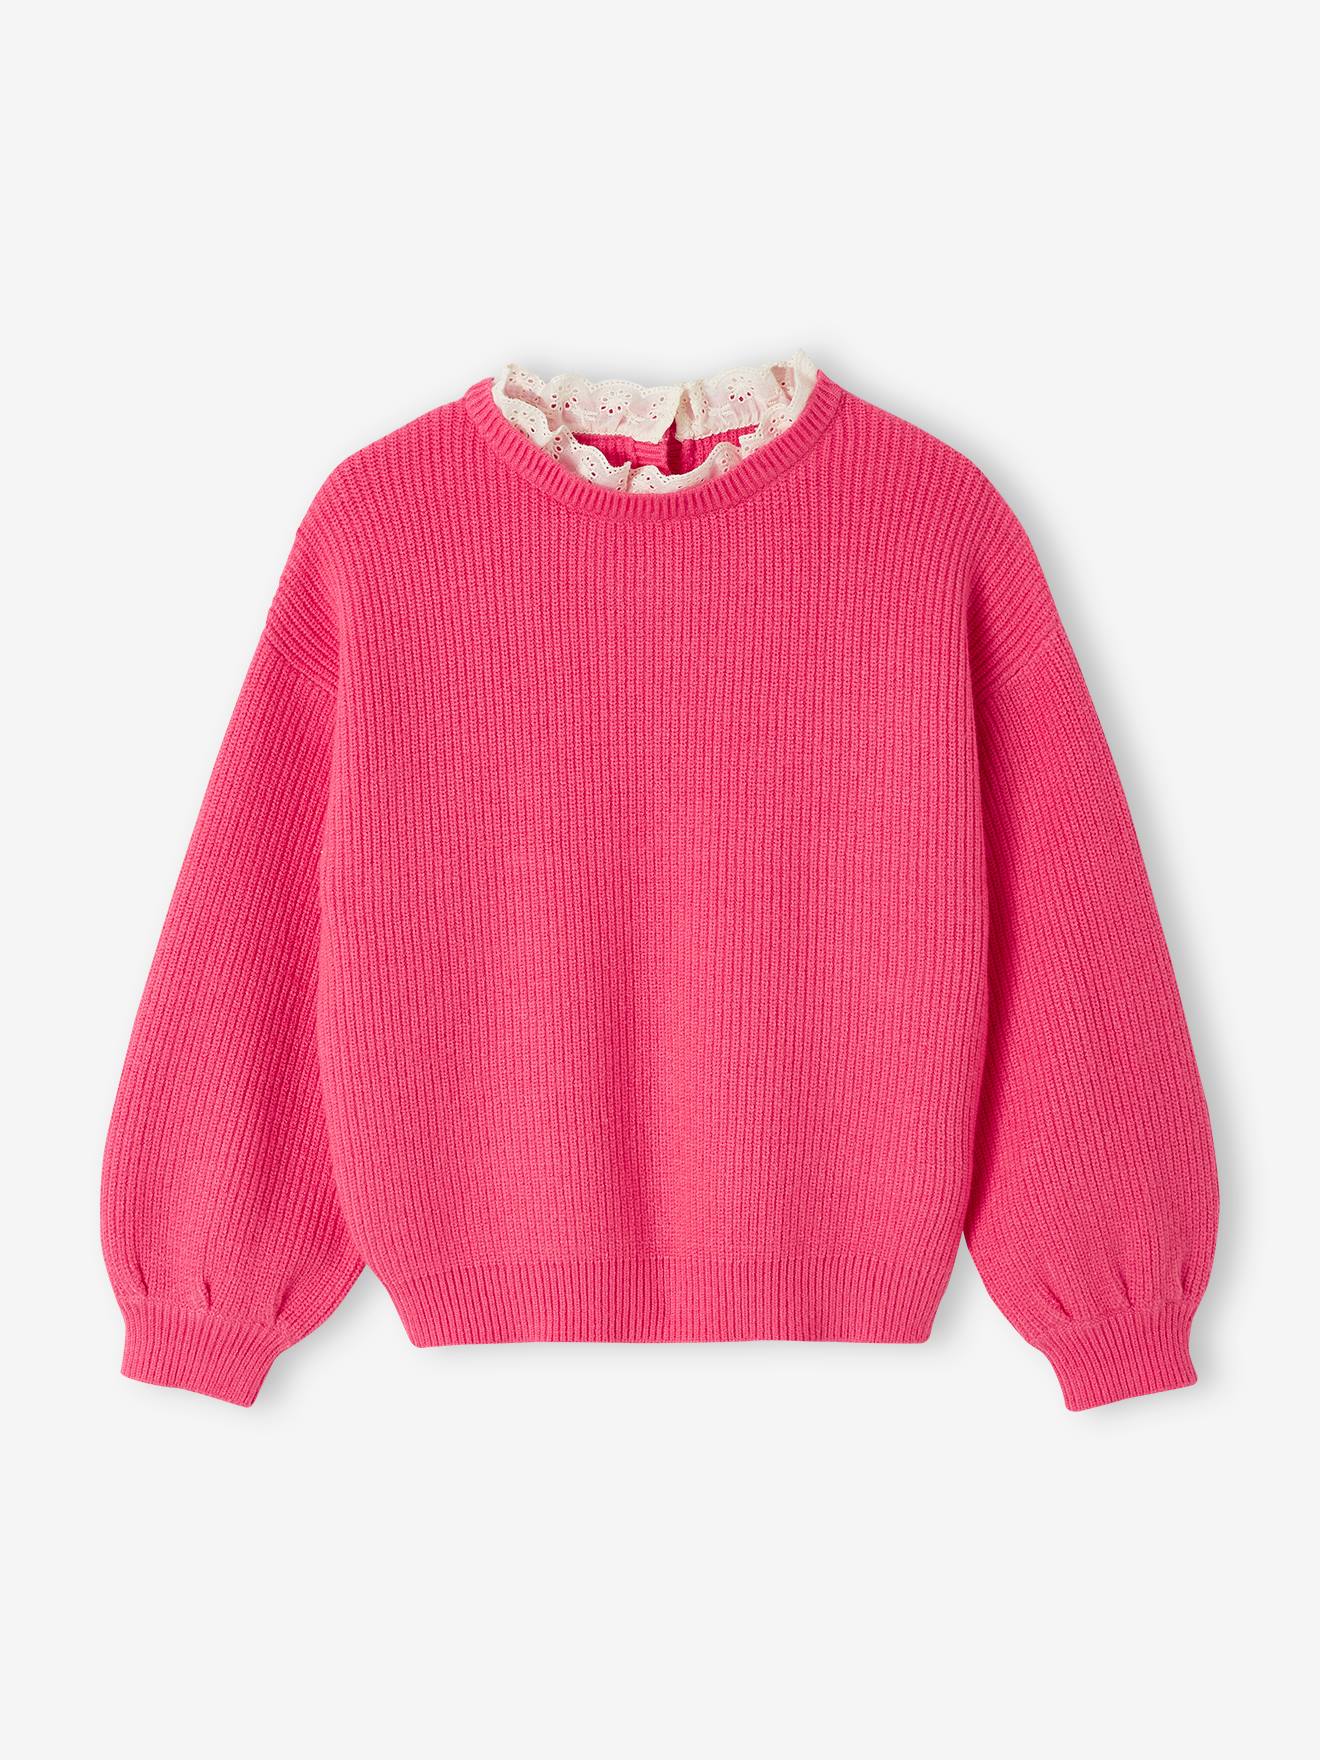 Loose-Fitting Jumper with Fancy Collar for Girls sweet pink